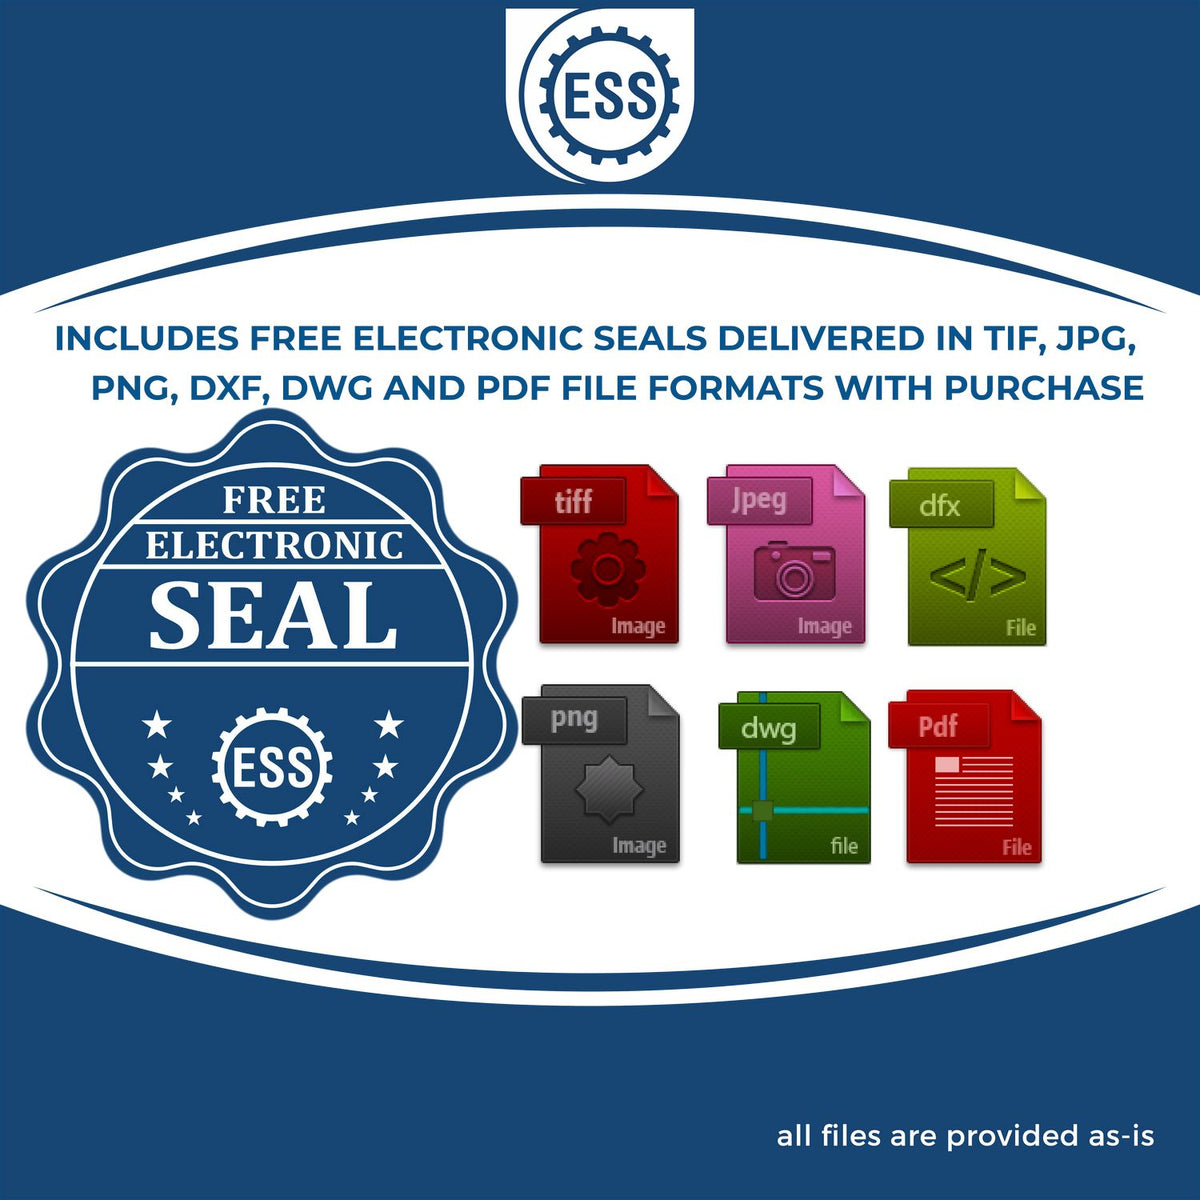 An infographic for the free electronic seal for the Slim Pre-Inked Maryland Landscape Architect Seal Stamp illustrating the different file type icons such as DXF, DWG, TIF, JPG and PNG.